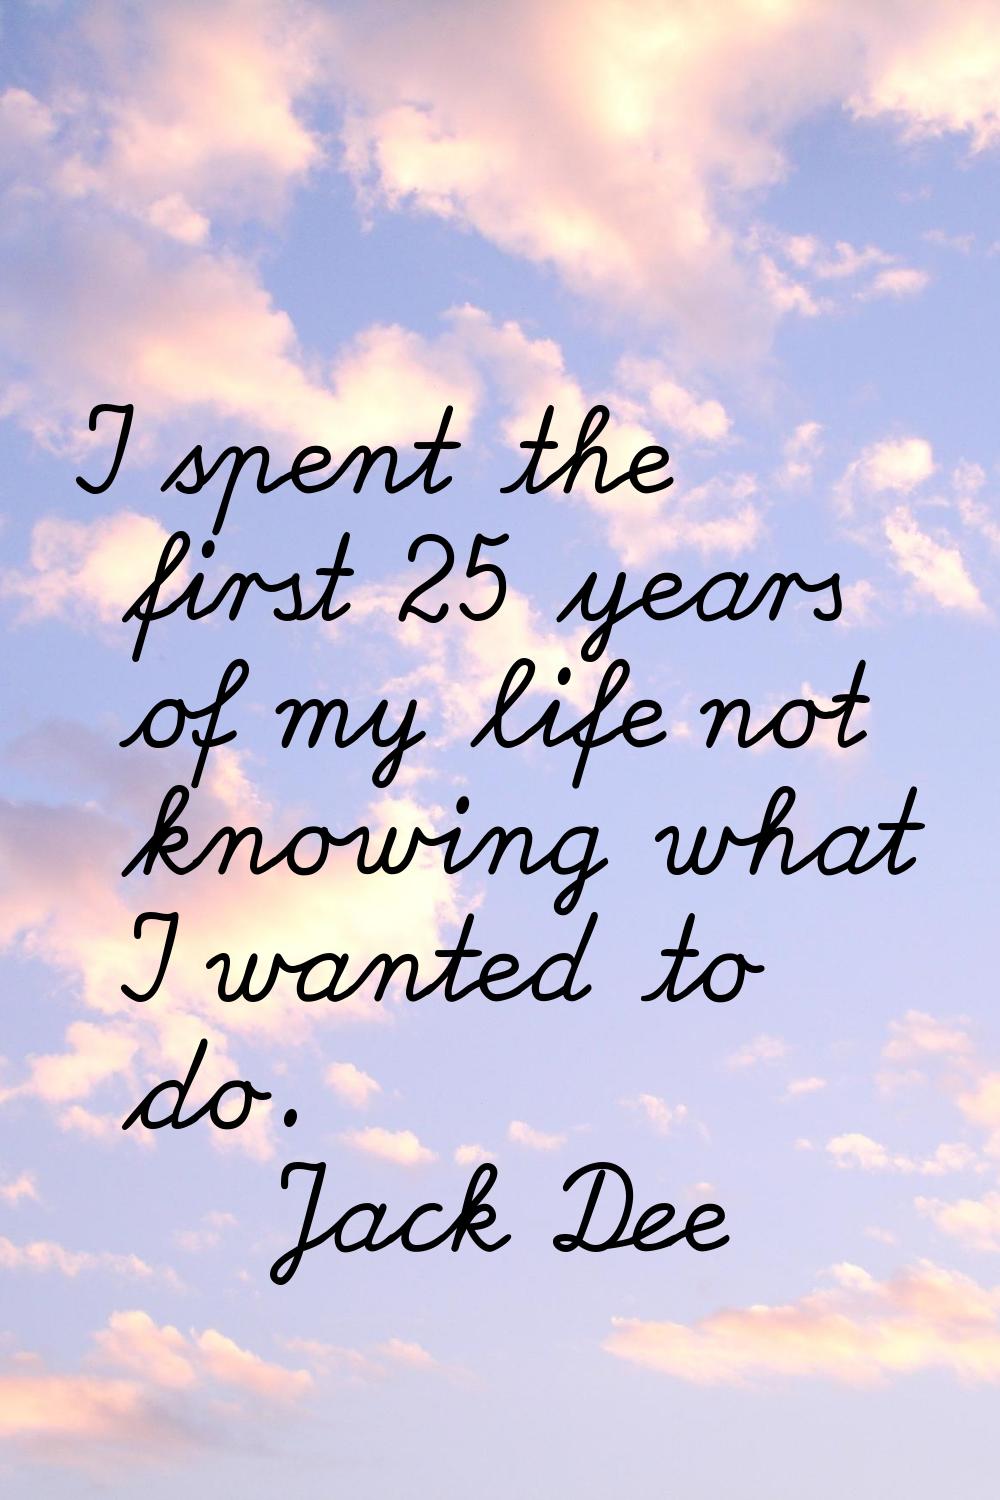 I spent the first 25 years of my life not knowing what I wanted to do.